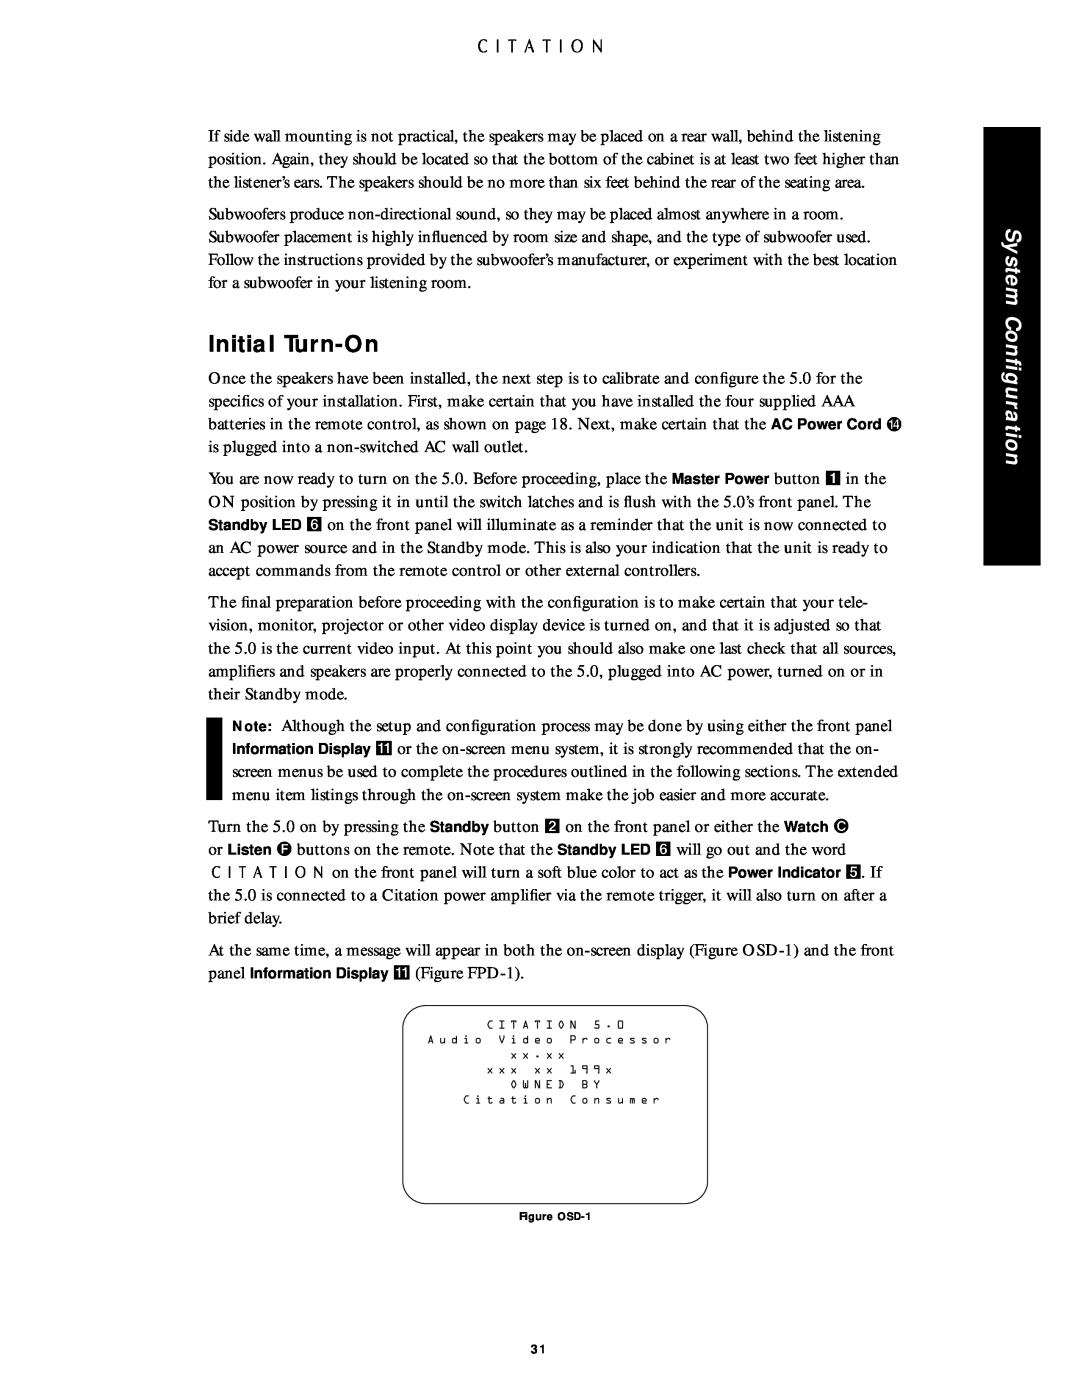 Citation Stereo Receiver owner manual Initial Turn-On, System Conﬁguration, Figure OSD-1 